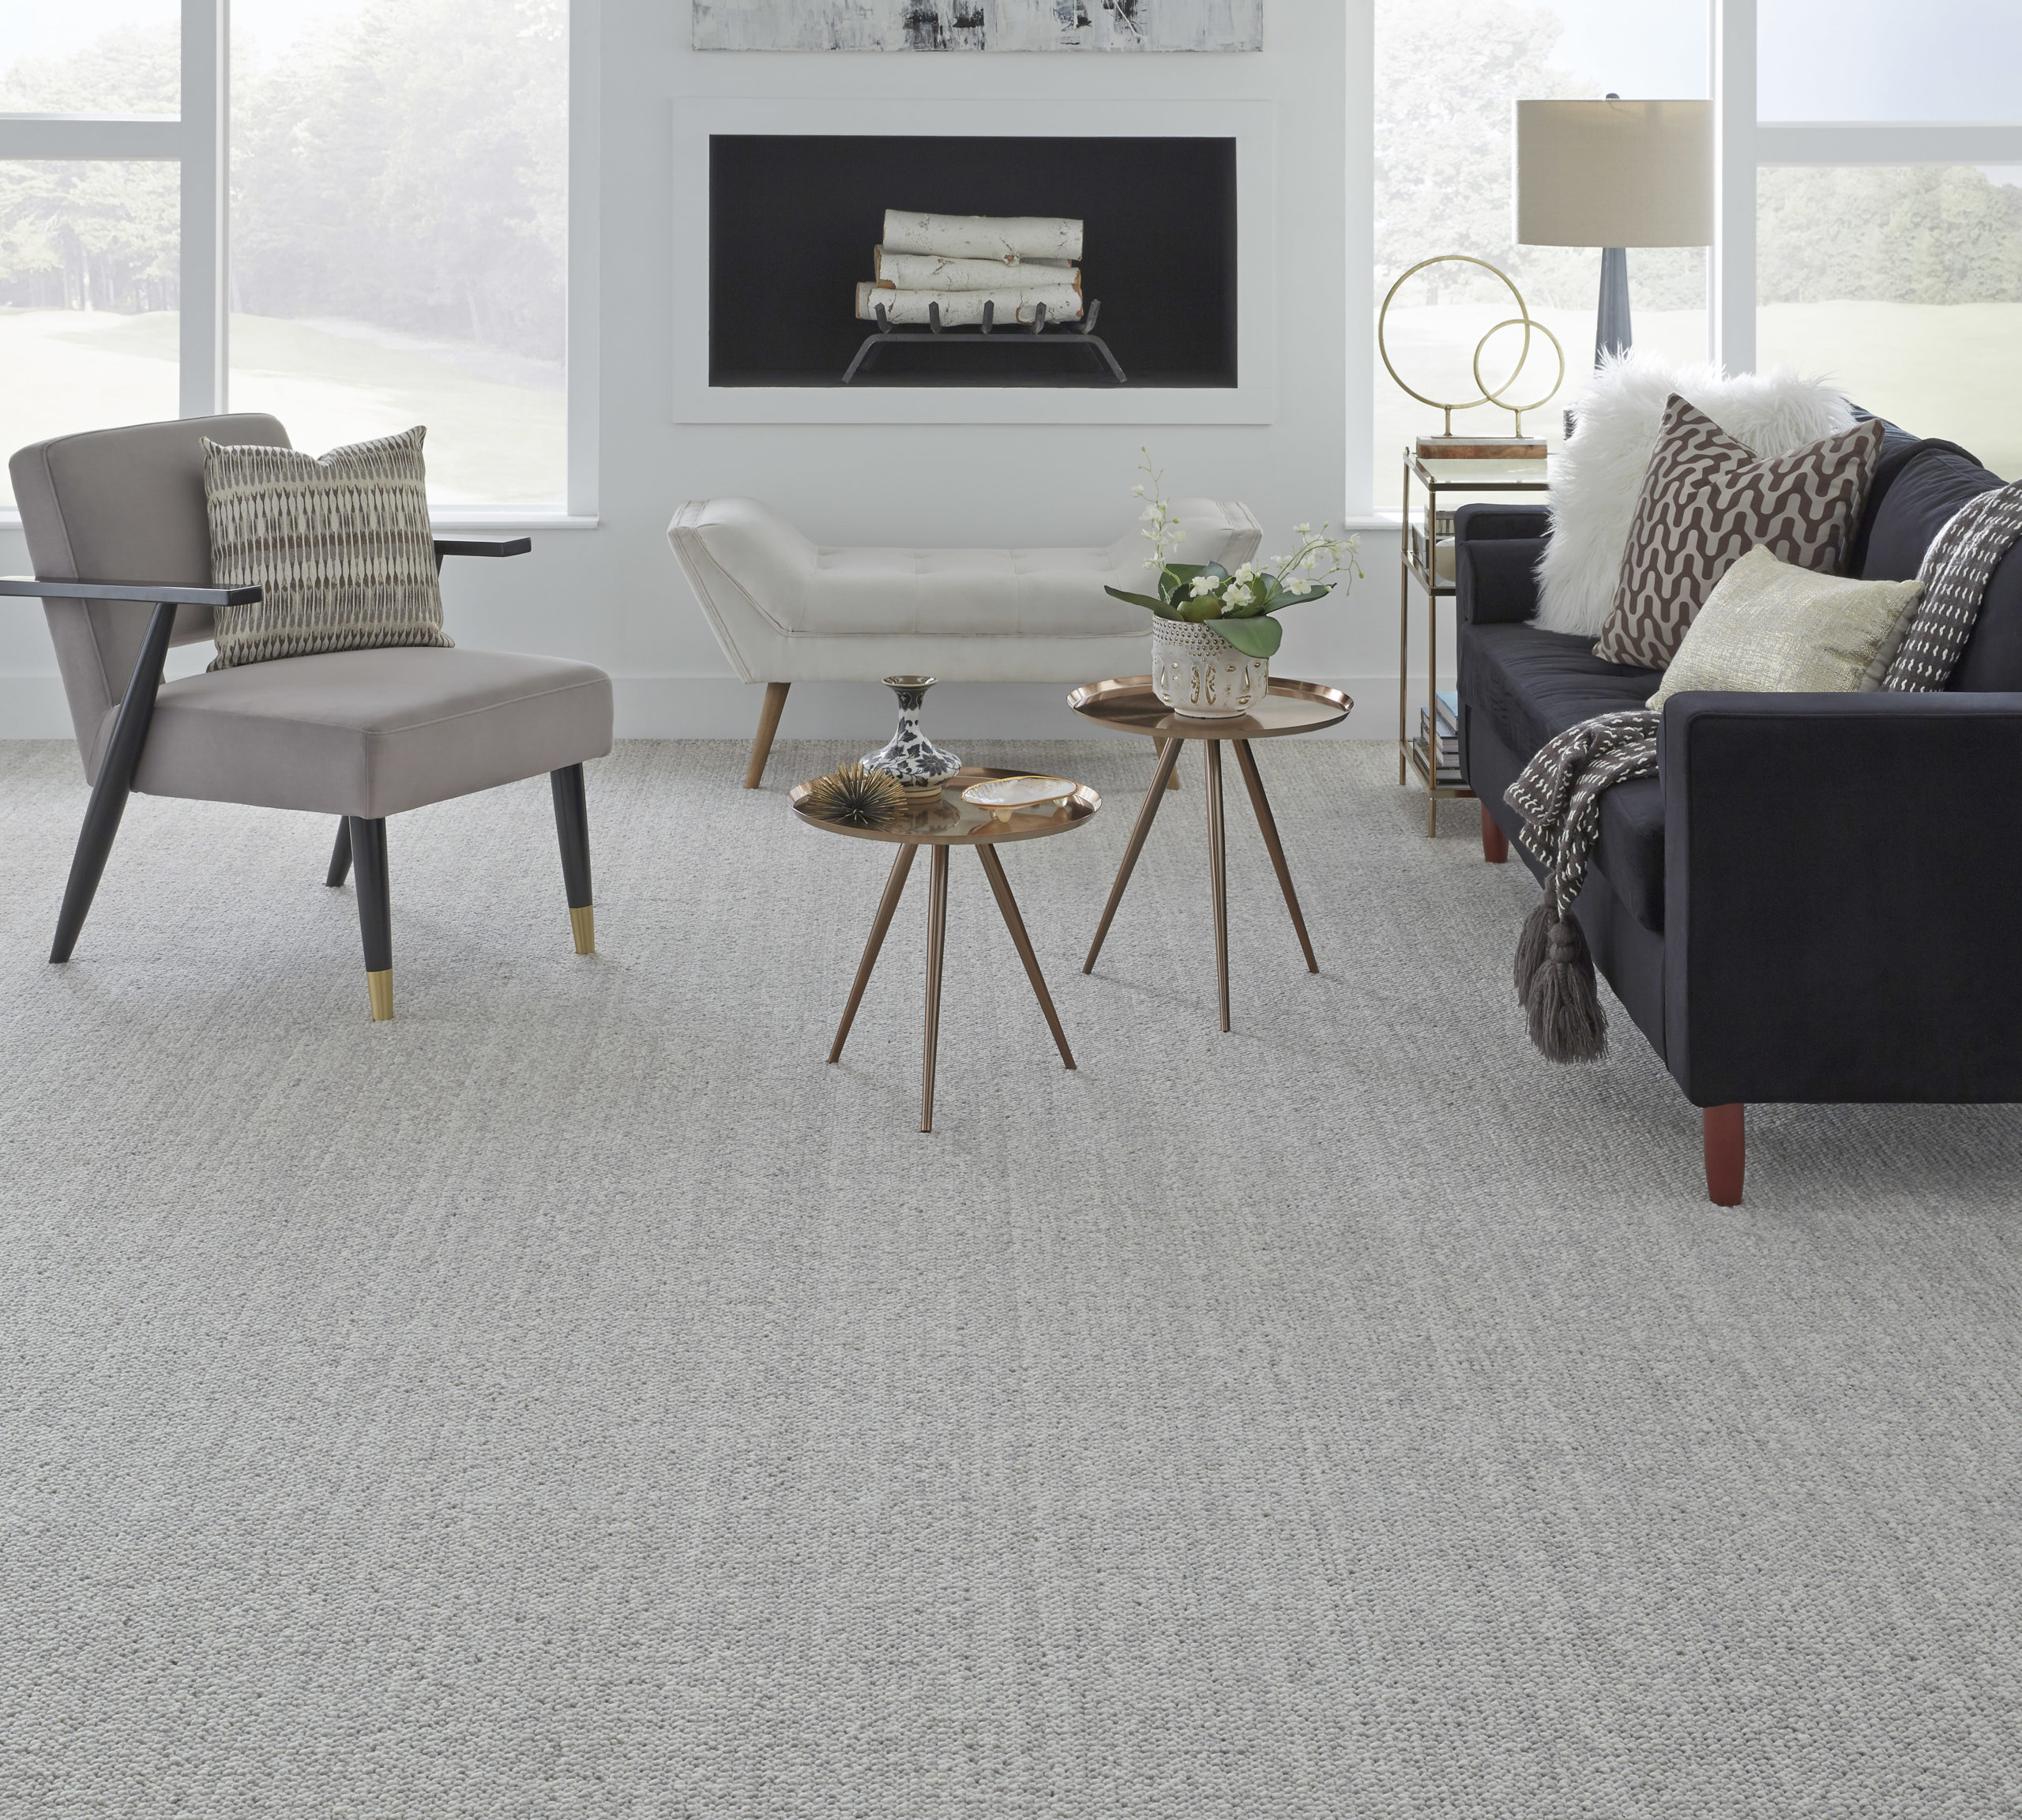 Grey wool carpet in a modern furnished living room with a white fireplace.